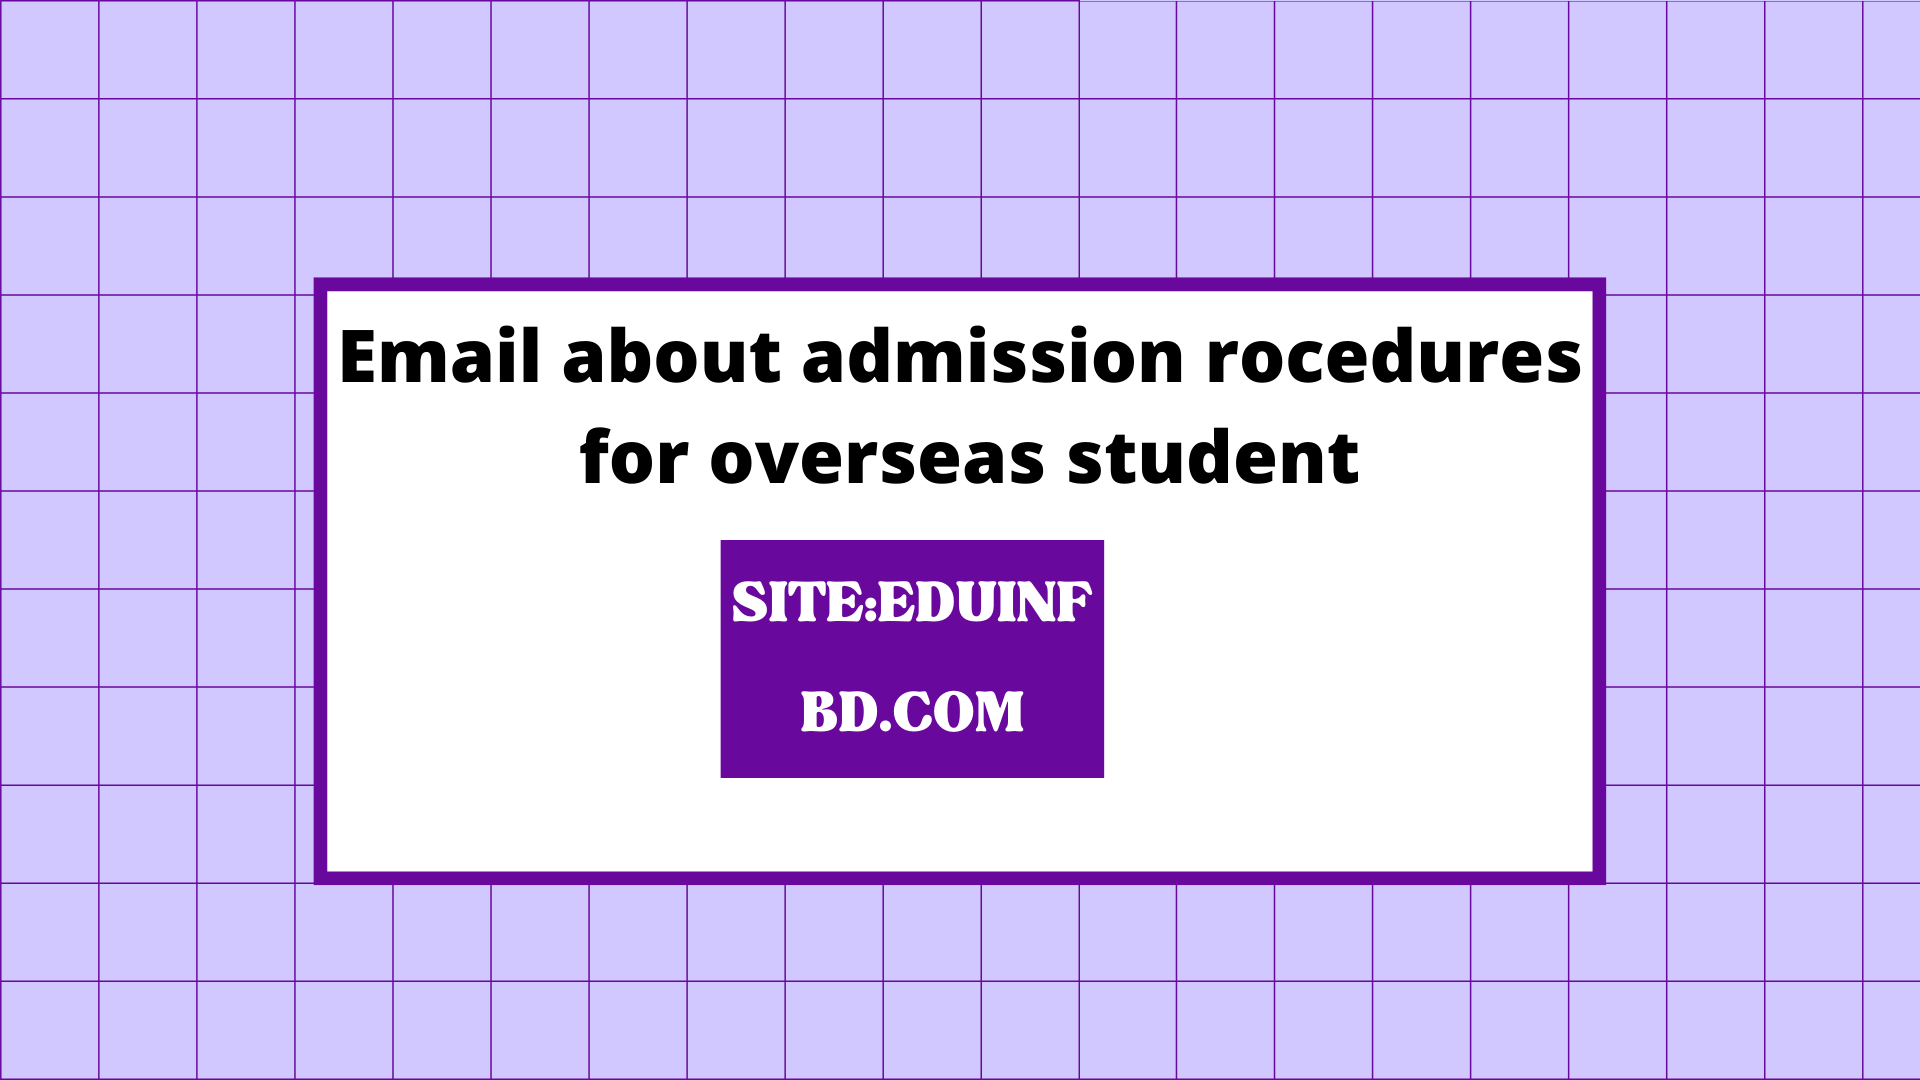 Email about admission procedures for overseas student